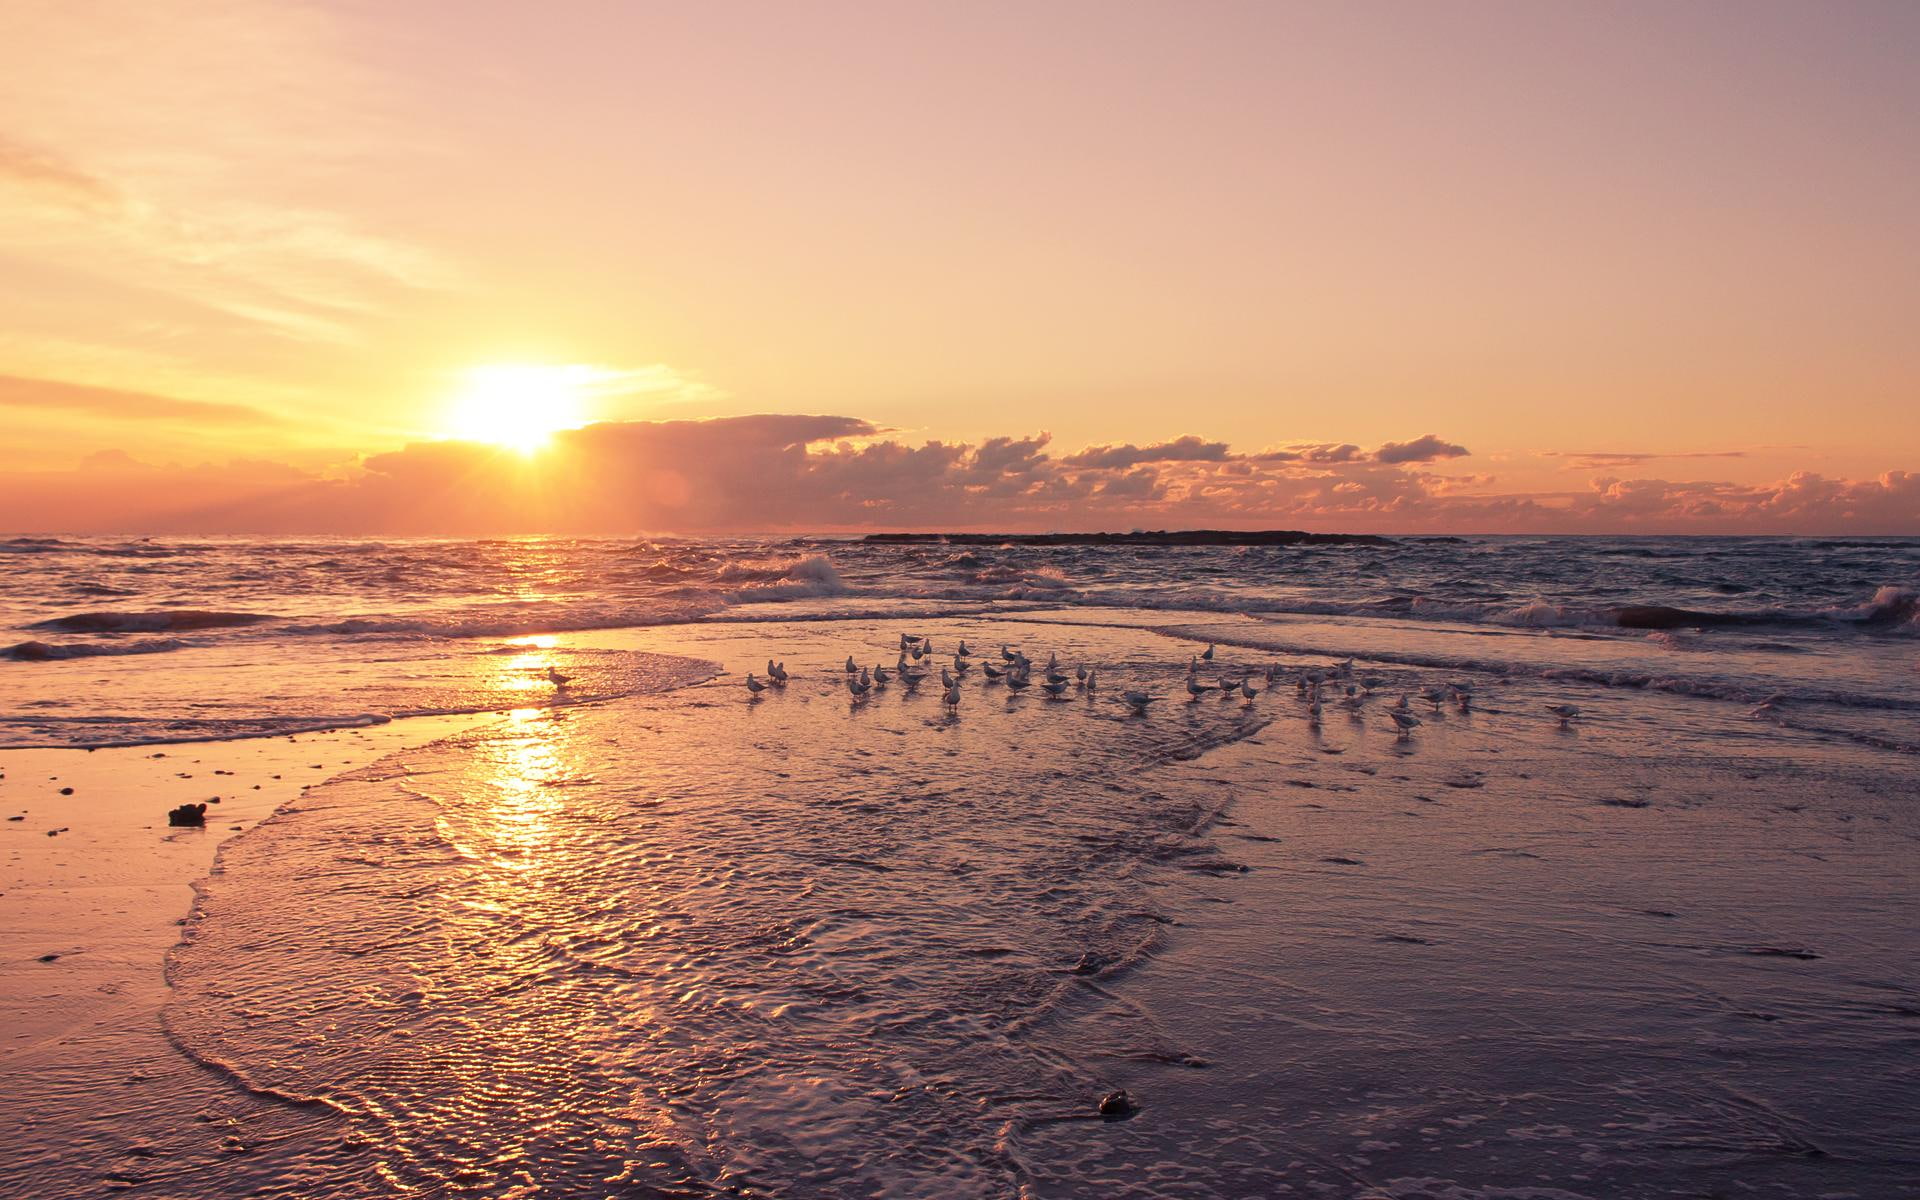 Shore Birds Basking In A Sunset, beach, waves, nature and landscapes